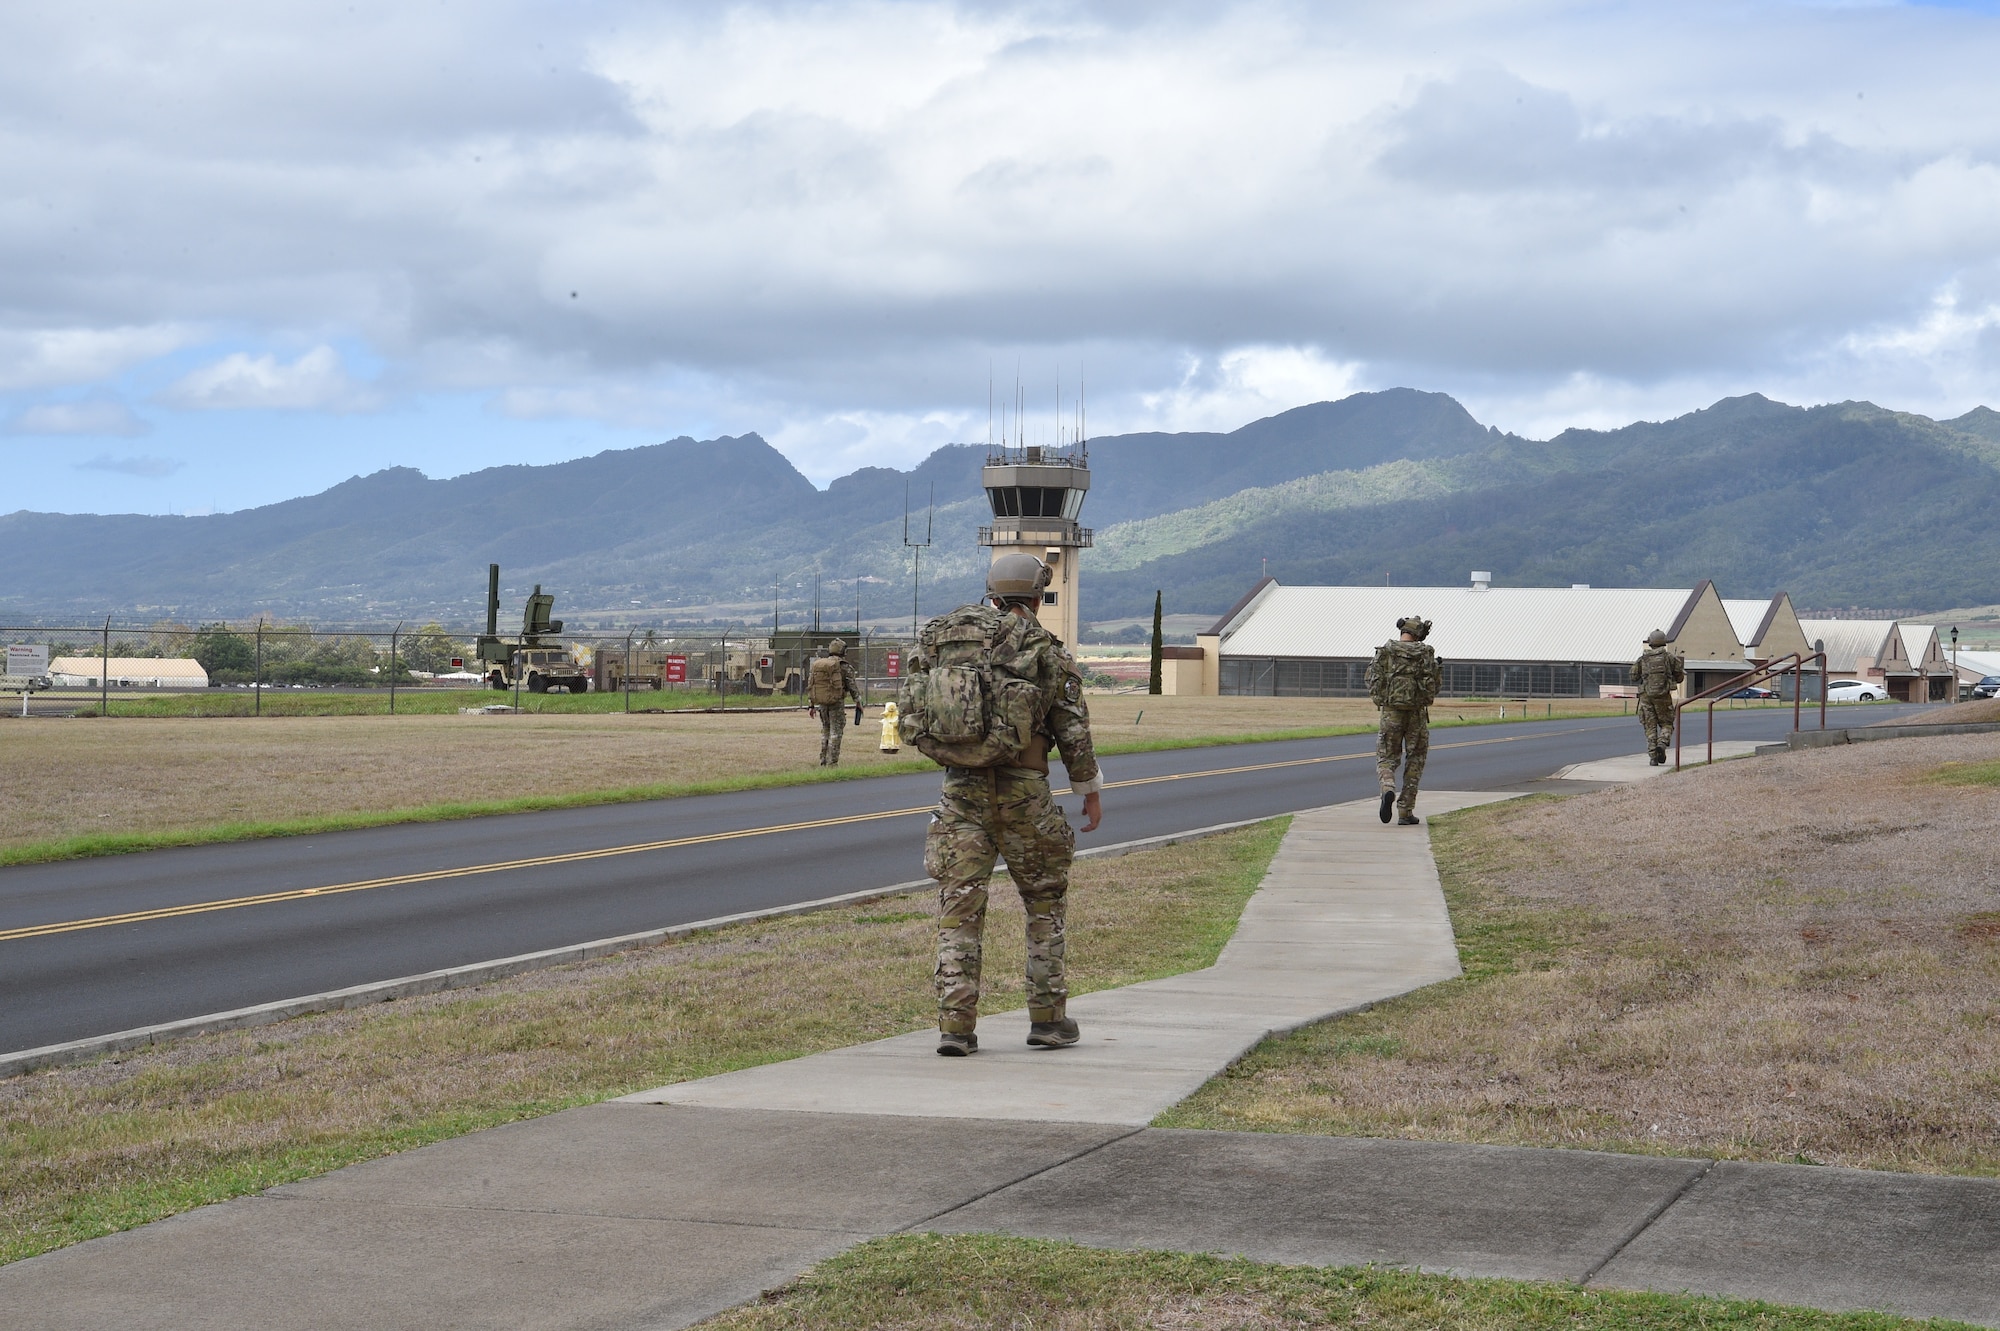 Airmen from the 25th Air Support Operations Squadron perform a three-mile ruck in full gear while stopping at different stations to learn about EvolutionONE, a GPS communication system, at Joint Base Pearl Harbor-Hickam, Hawaii, August 5, 2020. This training served as a mid-year assessment of the unit’s innovation tactics. (U.S. Air Force photo by 2nd Lt. Benjamin Aronson)